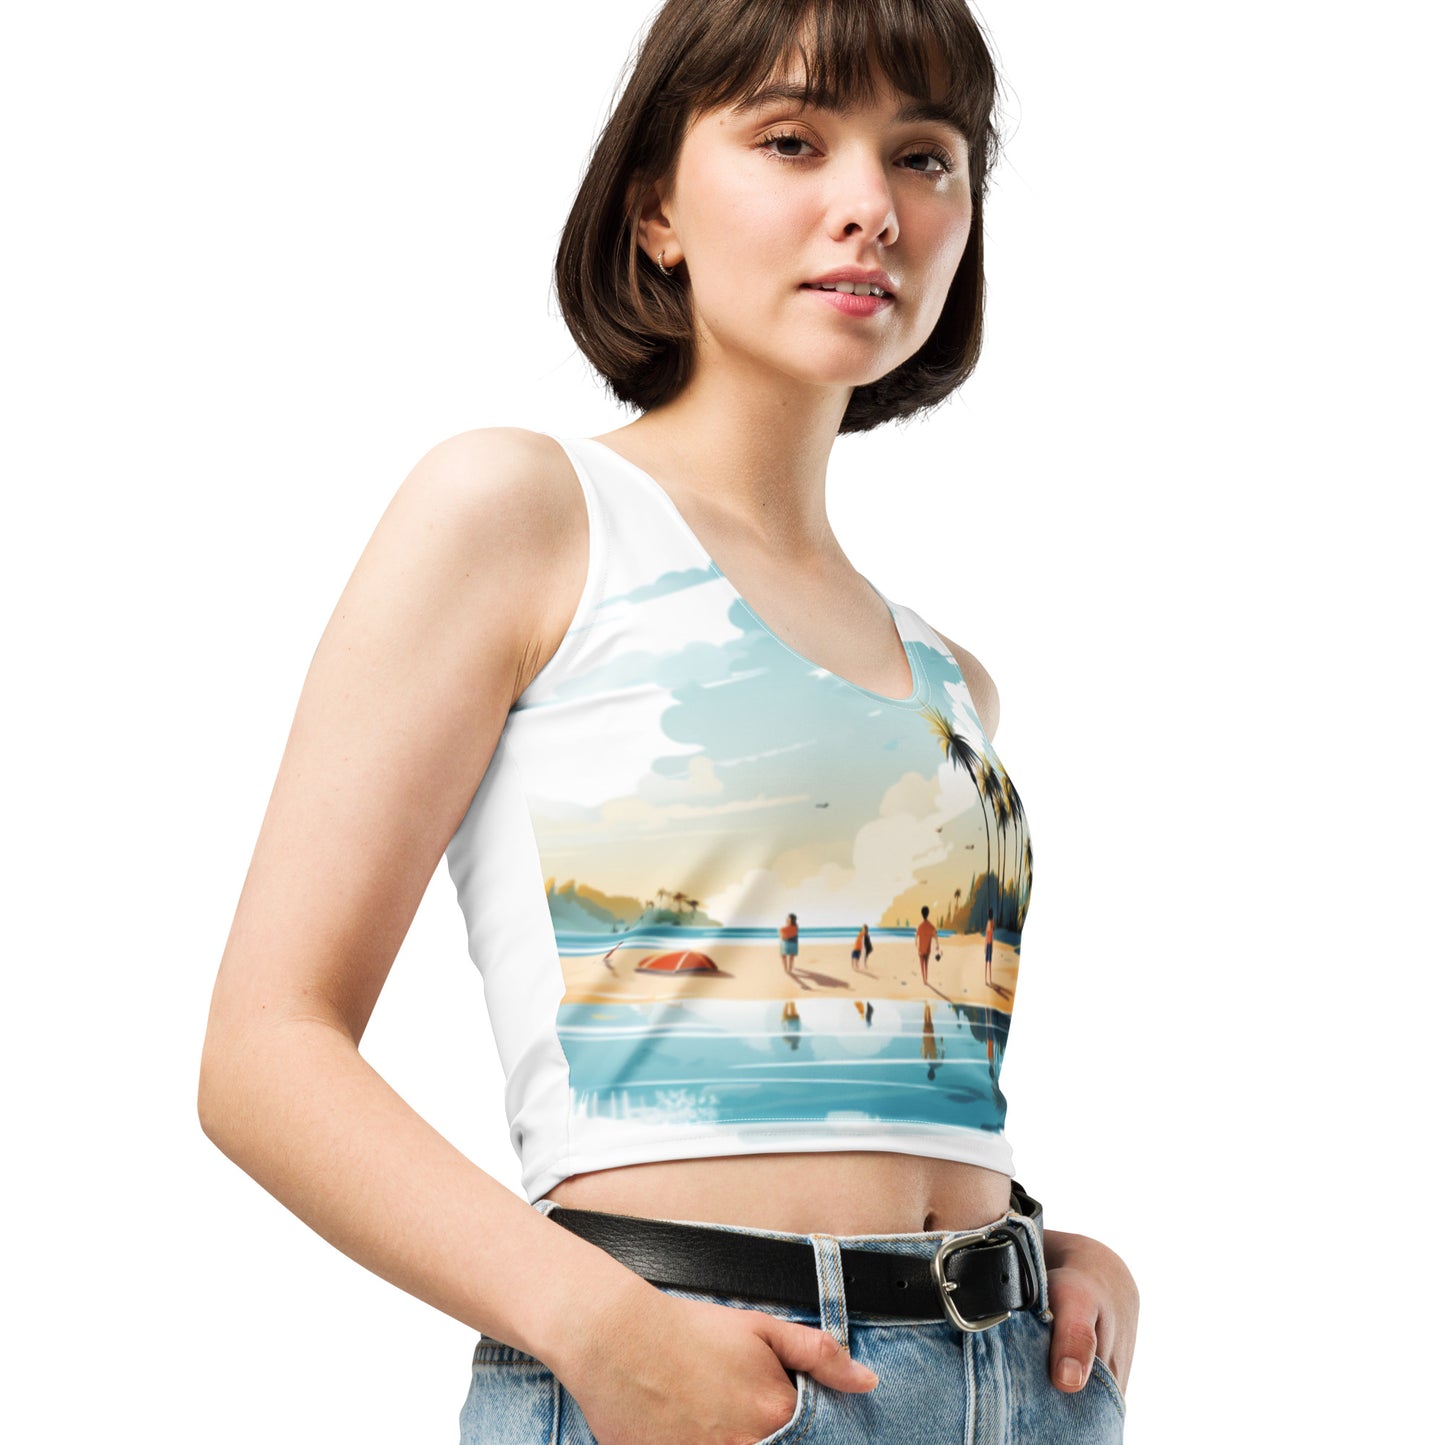 Women with white crop top and a picture of a island with sea and sand